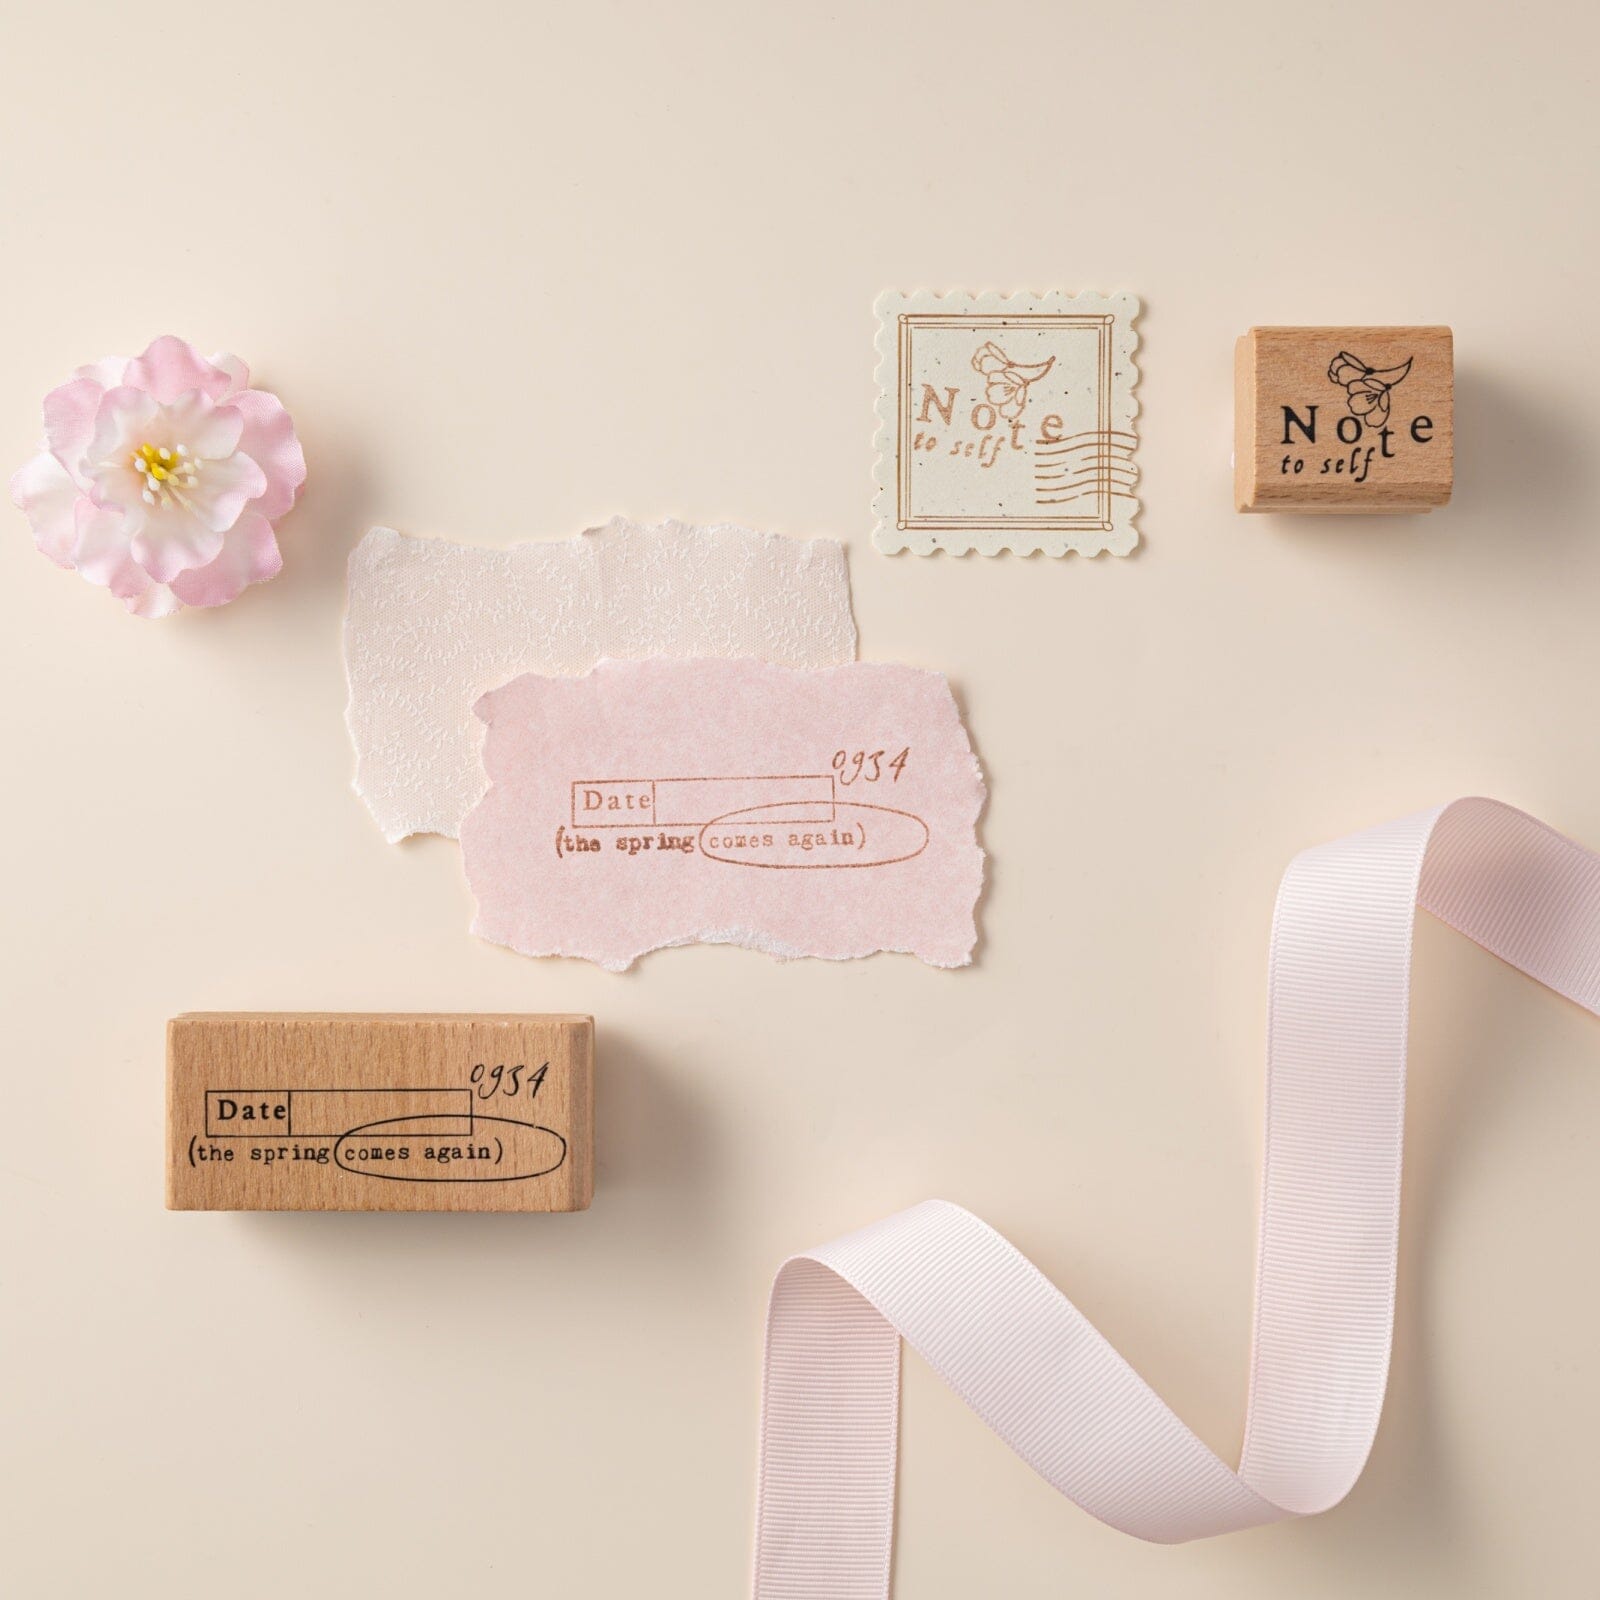 The spring comes again text on wooden stamp stamped on pink paper